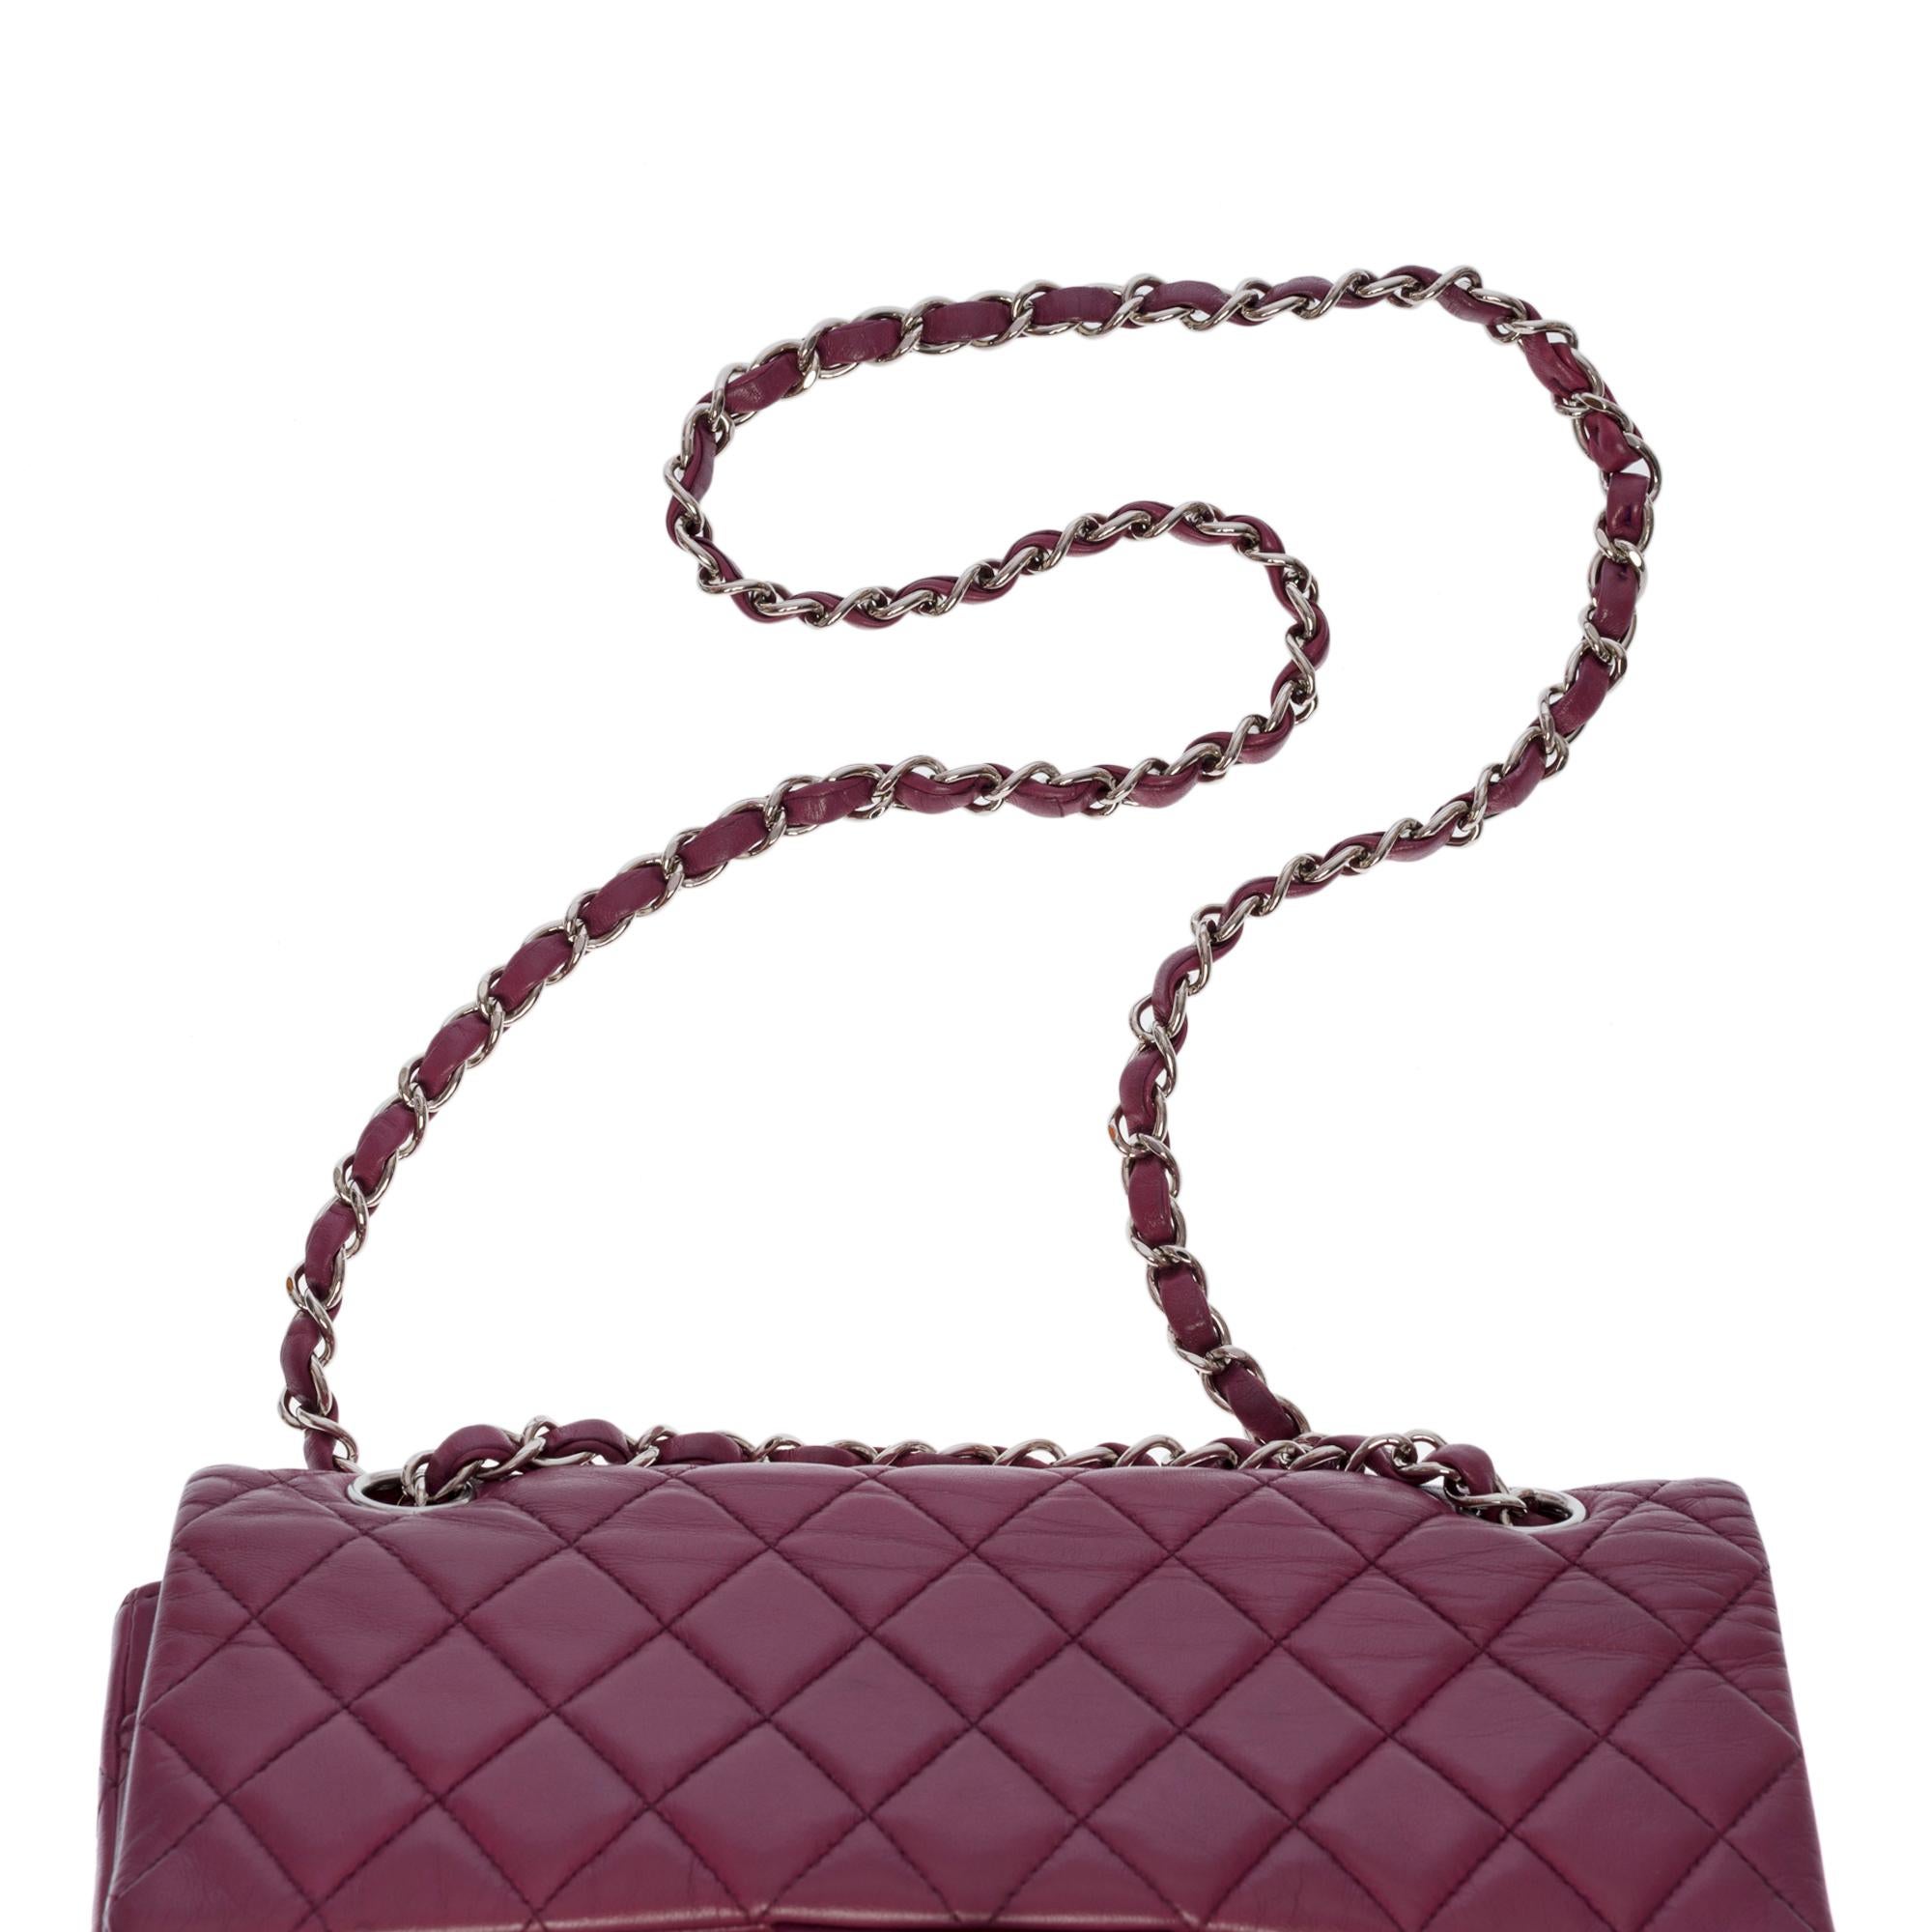 Chanel Timeless/Classic double Flap shoulder bag in Mauve quilted lambskin, SHW 2